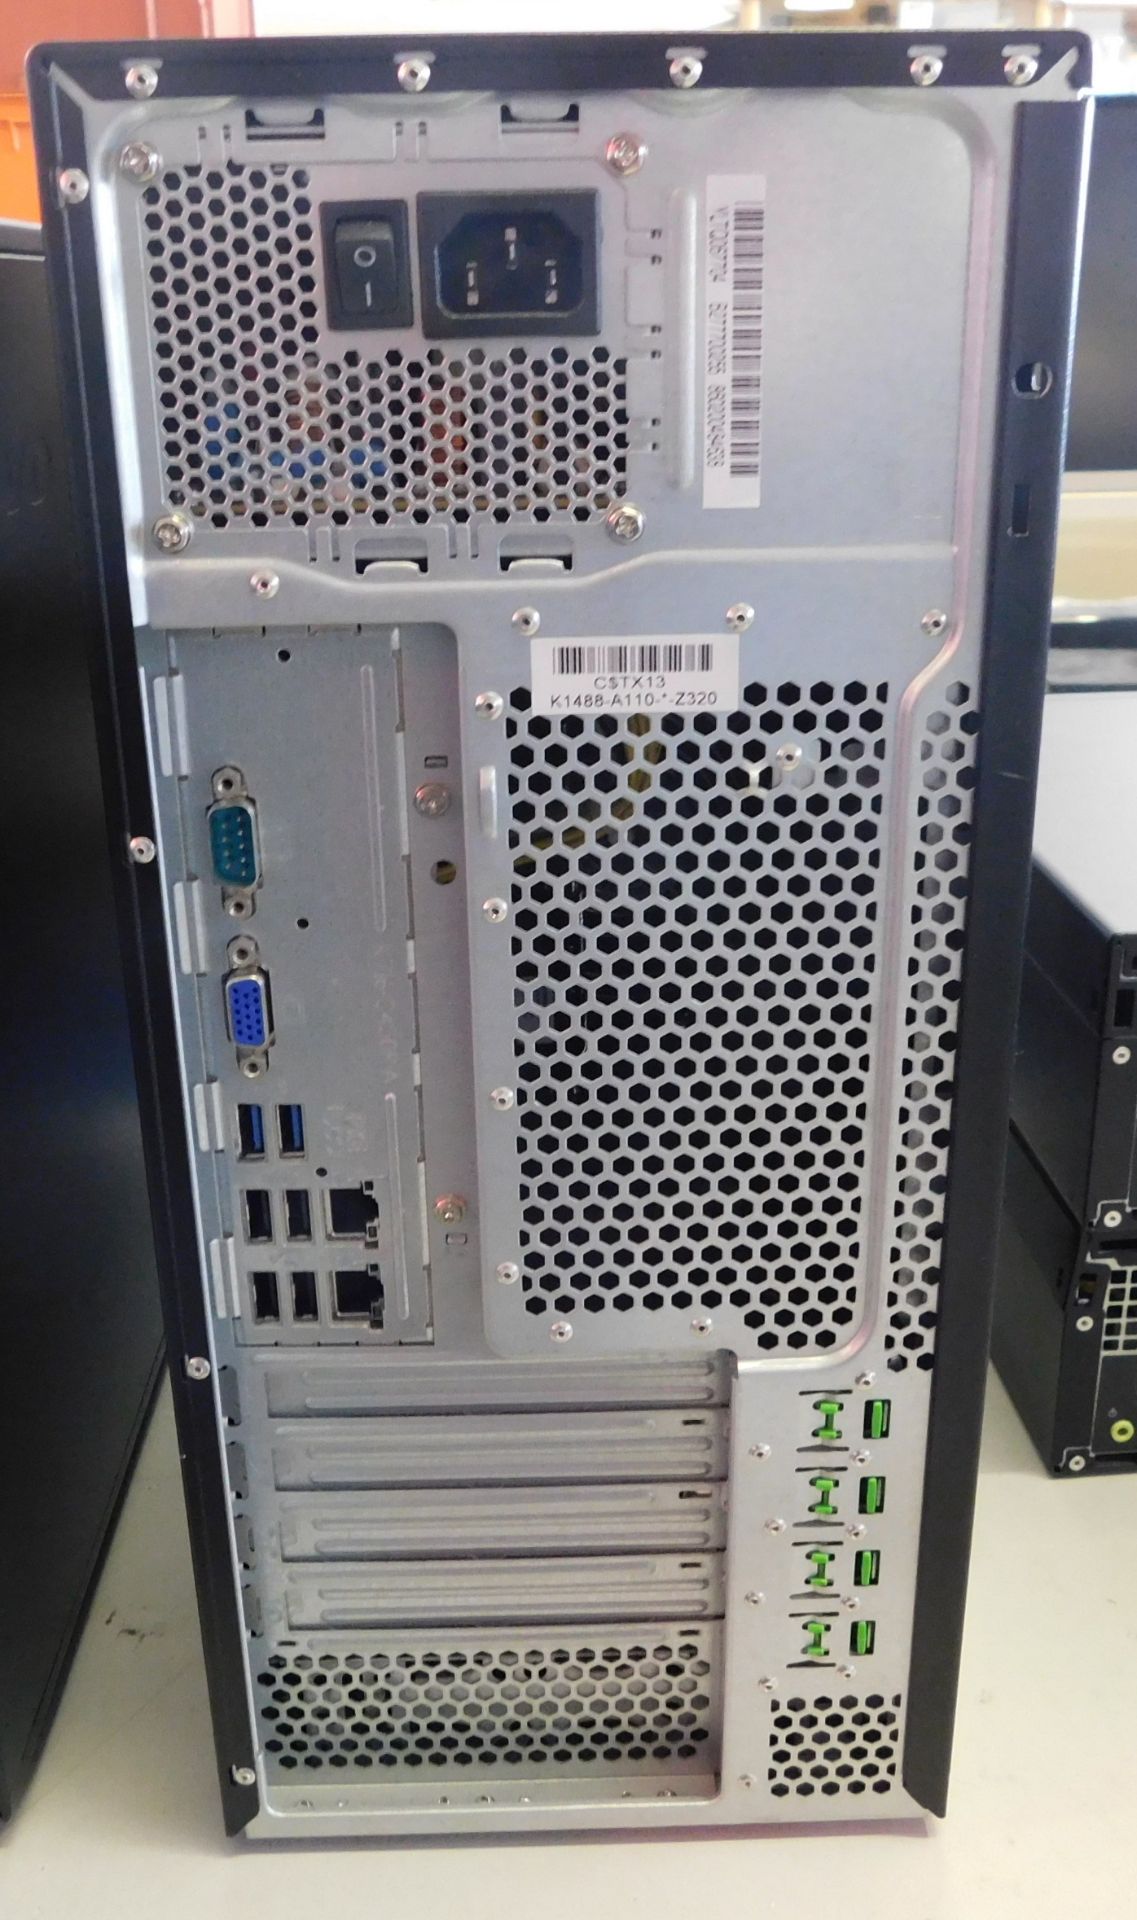 Fujitsu Primergy TX1310 Tower Server (No HDD) (Location Stockport. Please Refer to General Notes) - Image 2 of 2